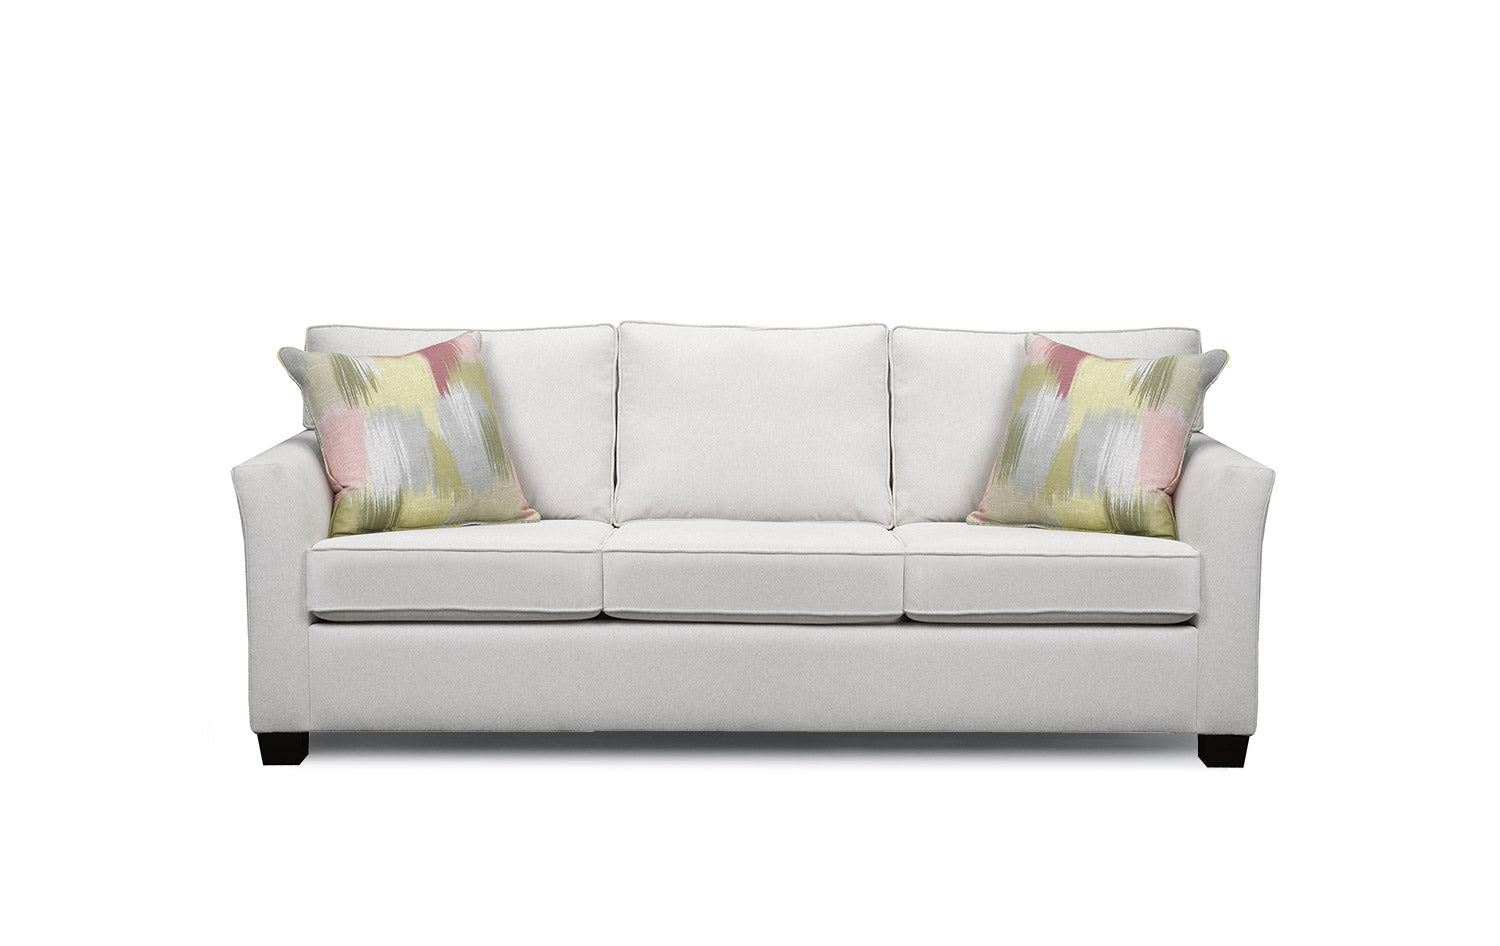 Brentwood Classic Sofa collection special sofa or Loveseat $1499 each